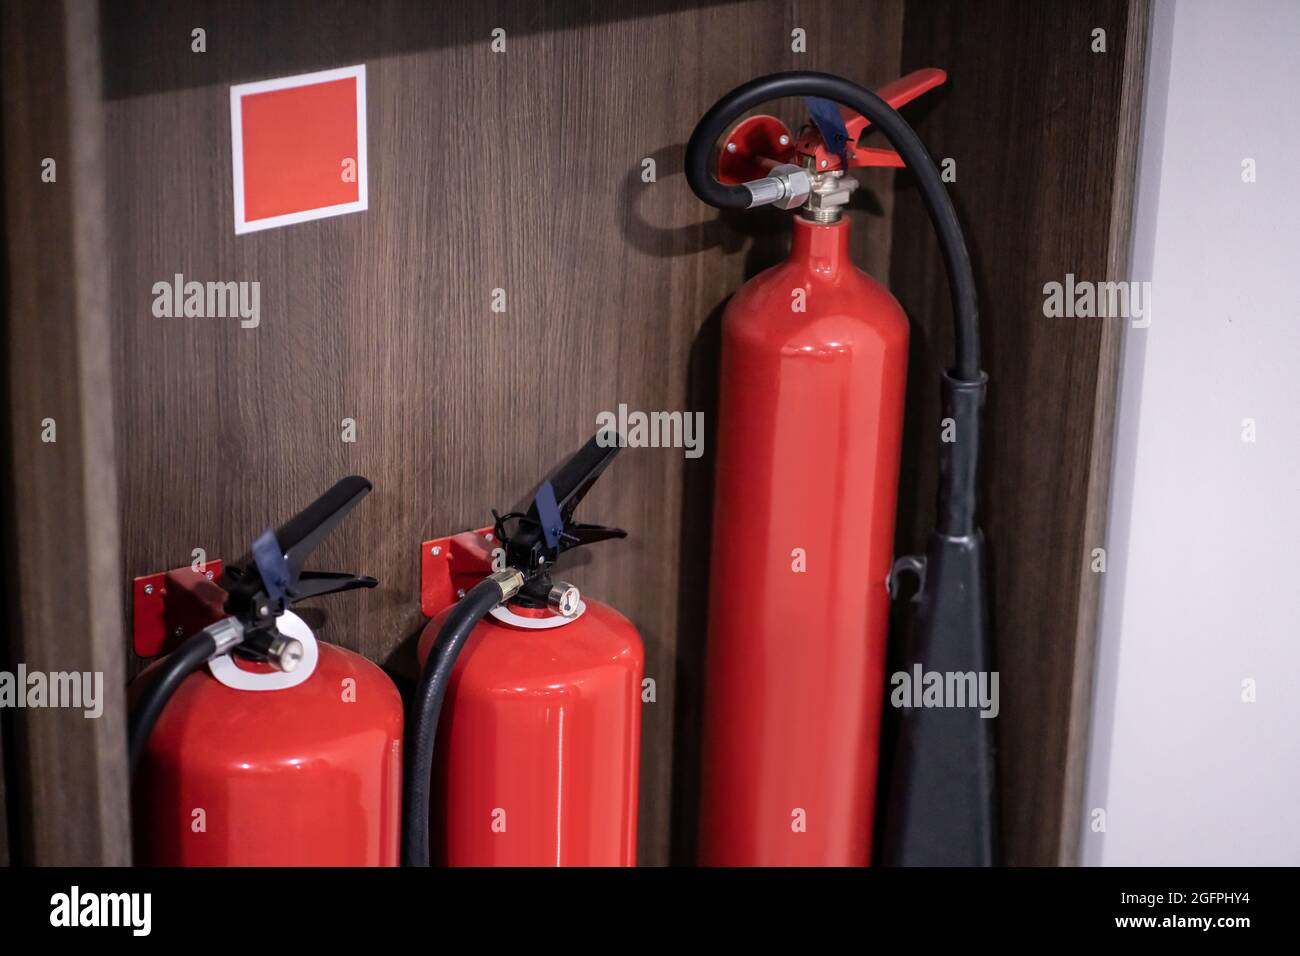 Fire Extinguisher Safety And Emergency Equipment. Alarm Services Stock Photo